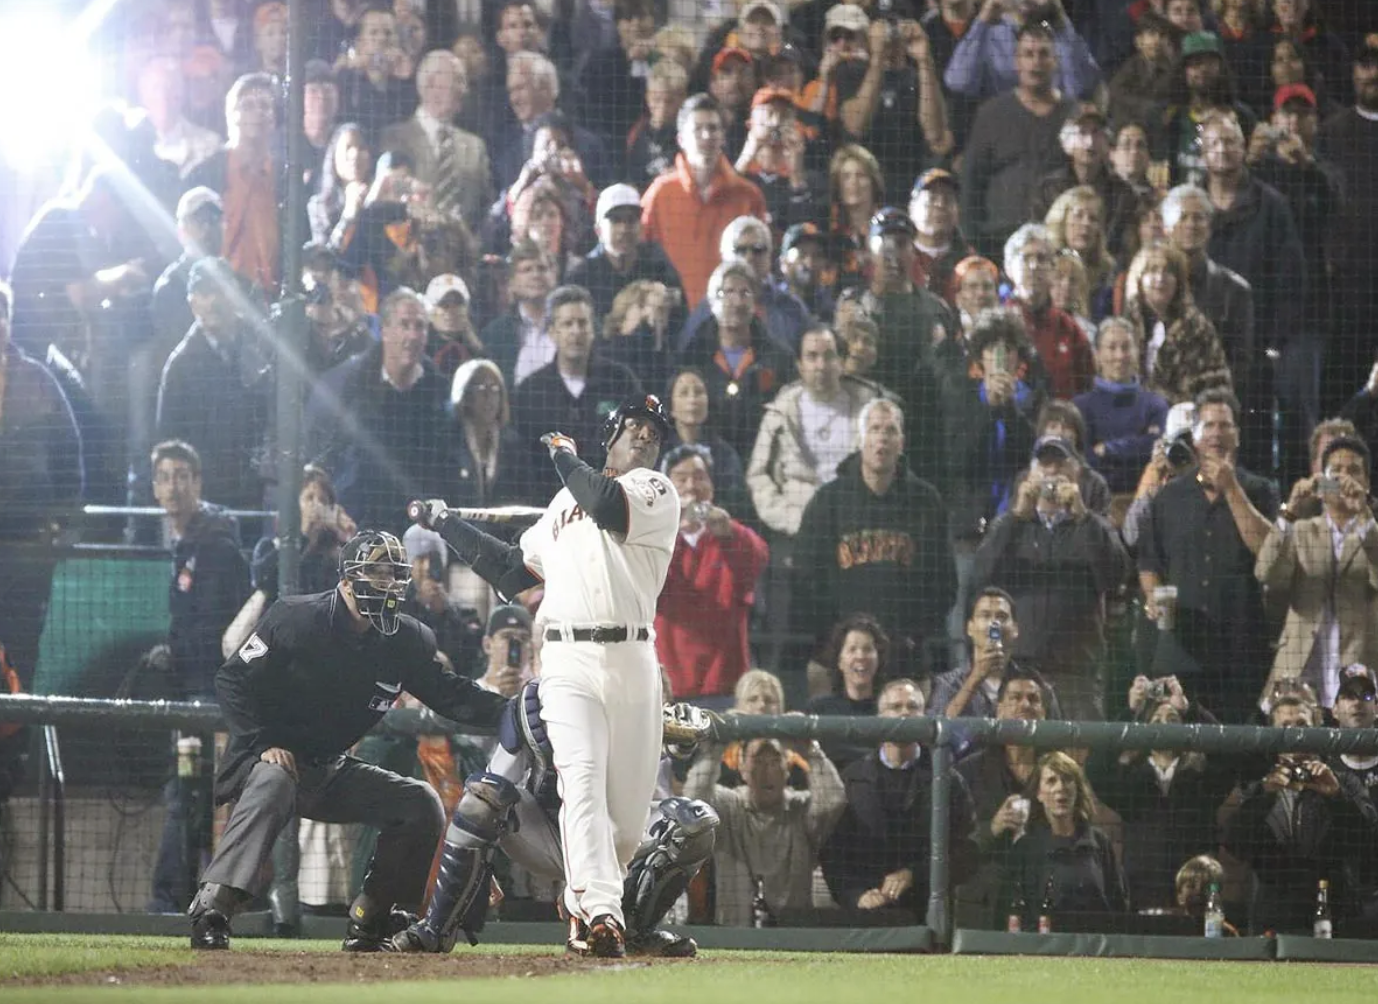 Barry Bonds, 2007. Home run number 756. Photo by: Brad Mangin.